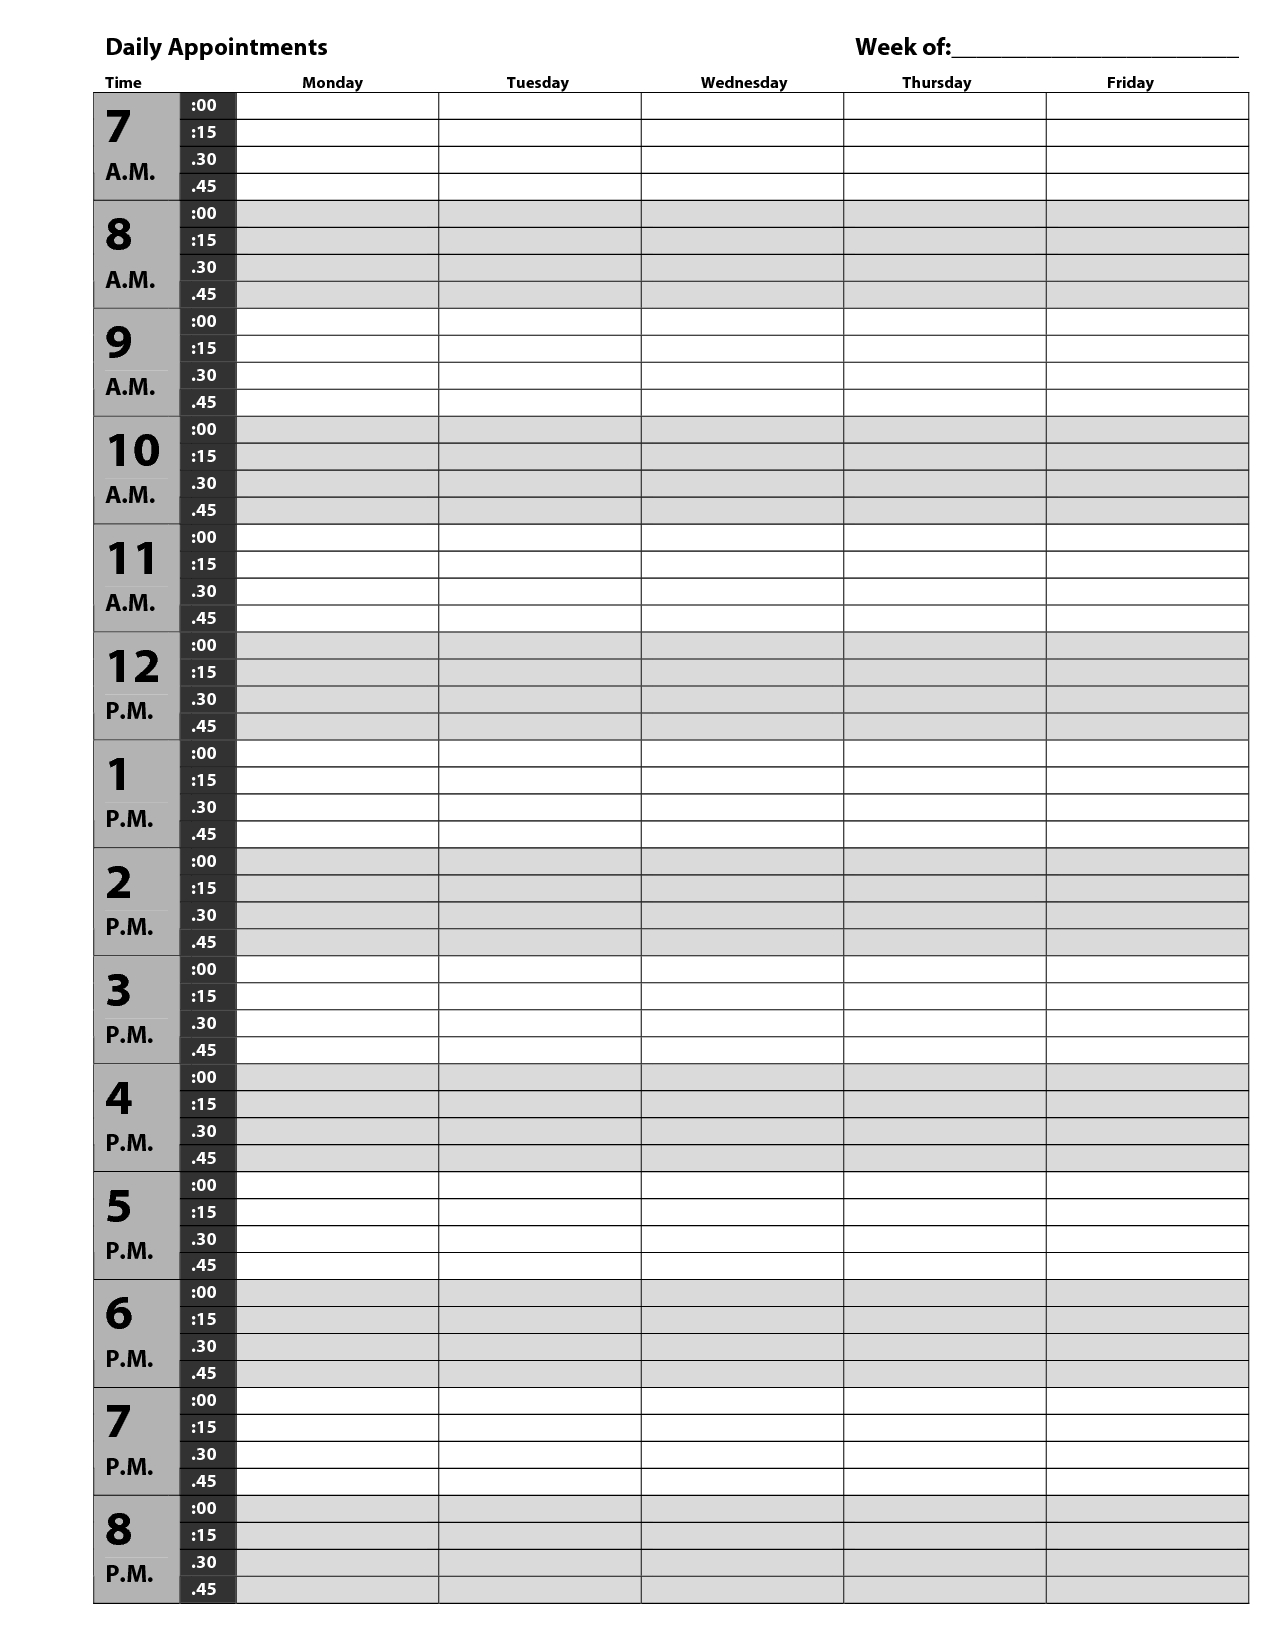 Appointment Book  Pdf | Appointment Calendar, Daily Planner intended for Free Printable Appointment Calendar